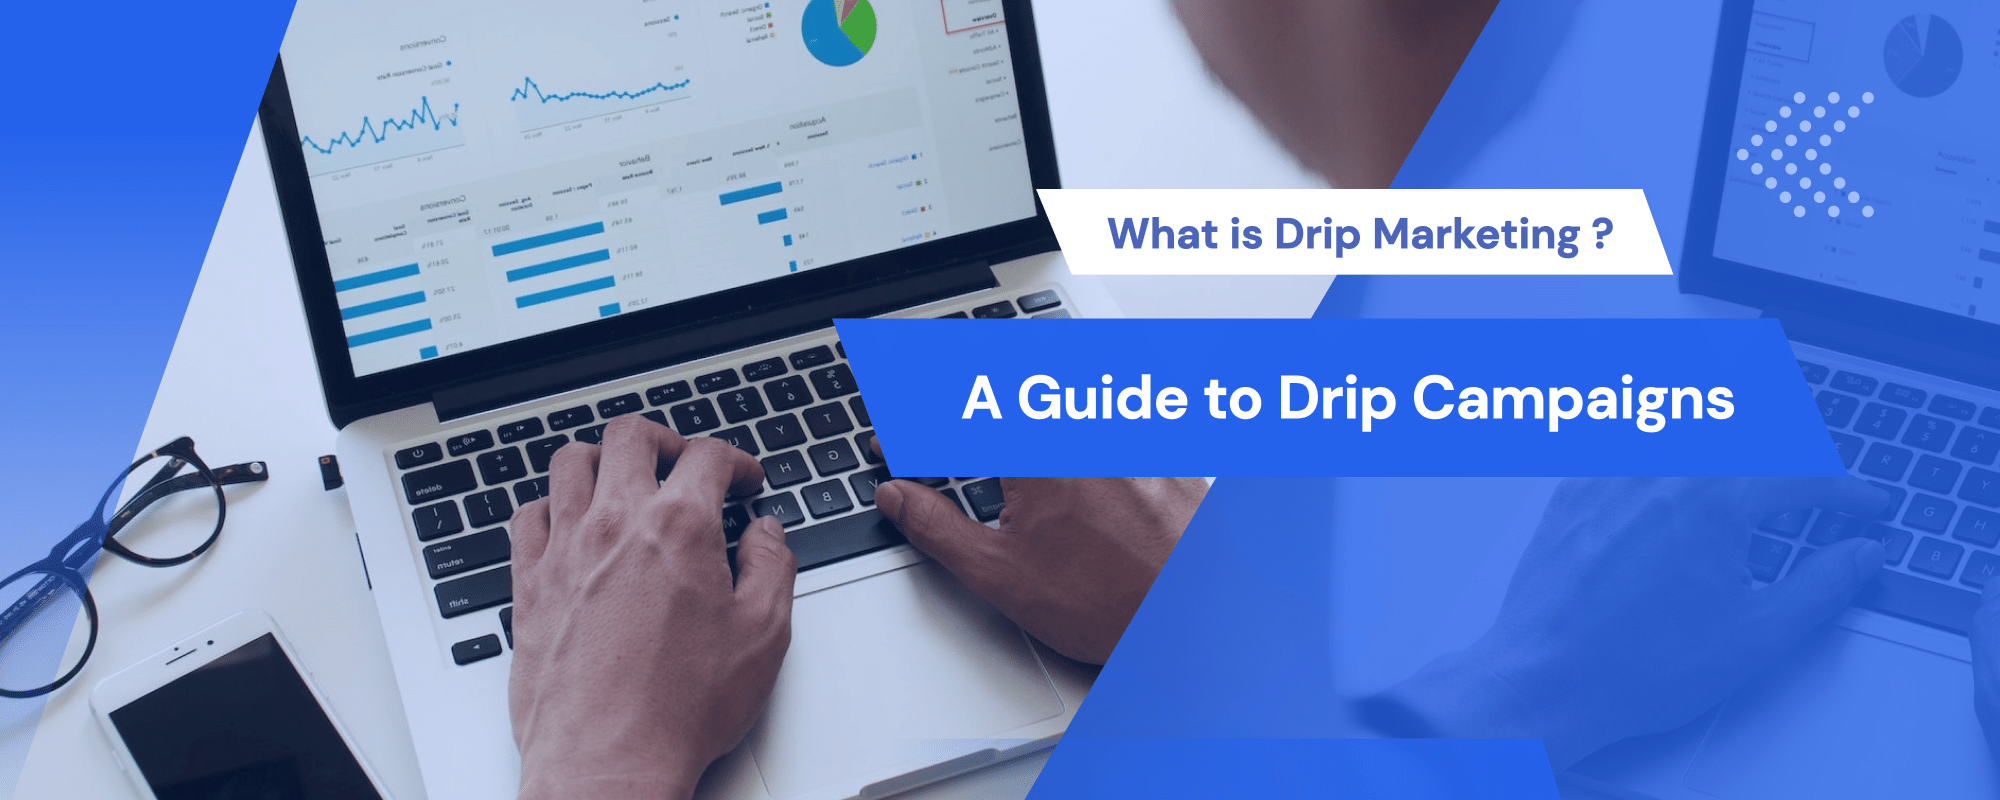 What is Drip Marketing? A Smart Guide to Drip Marketing